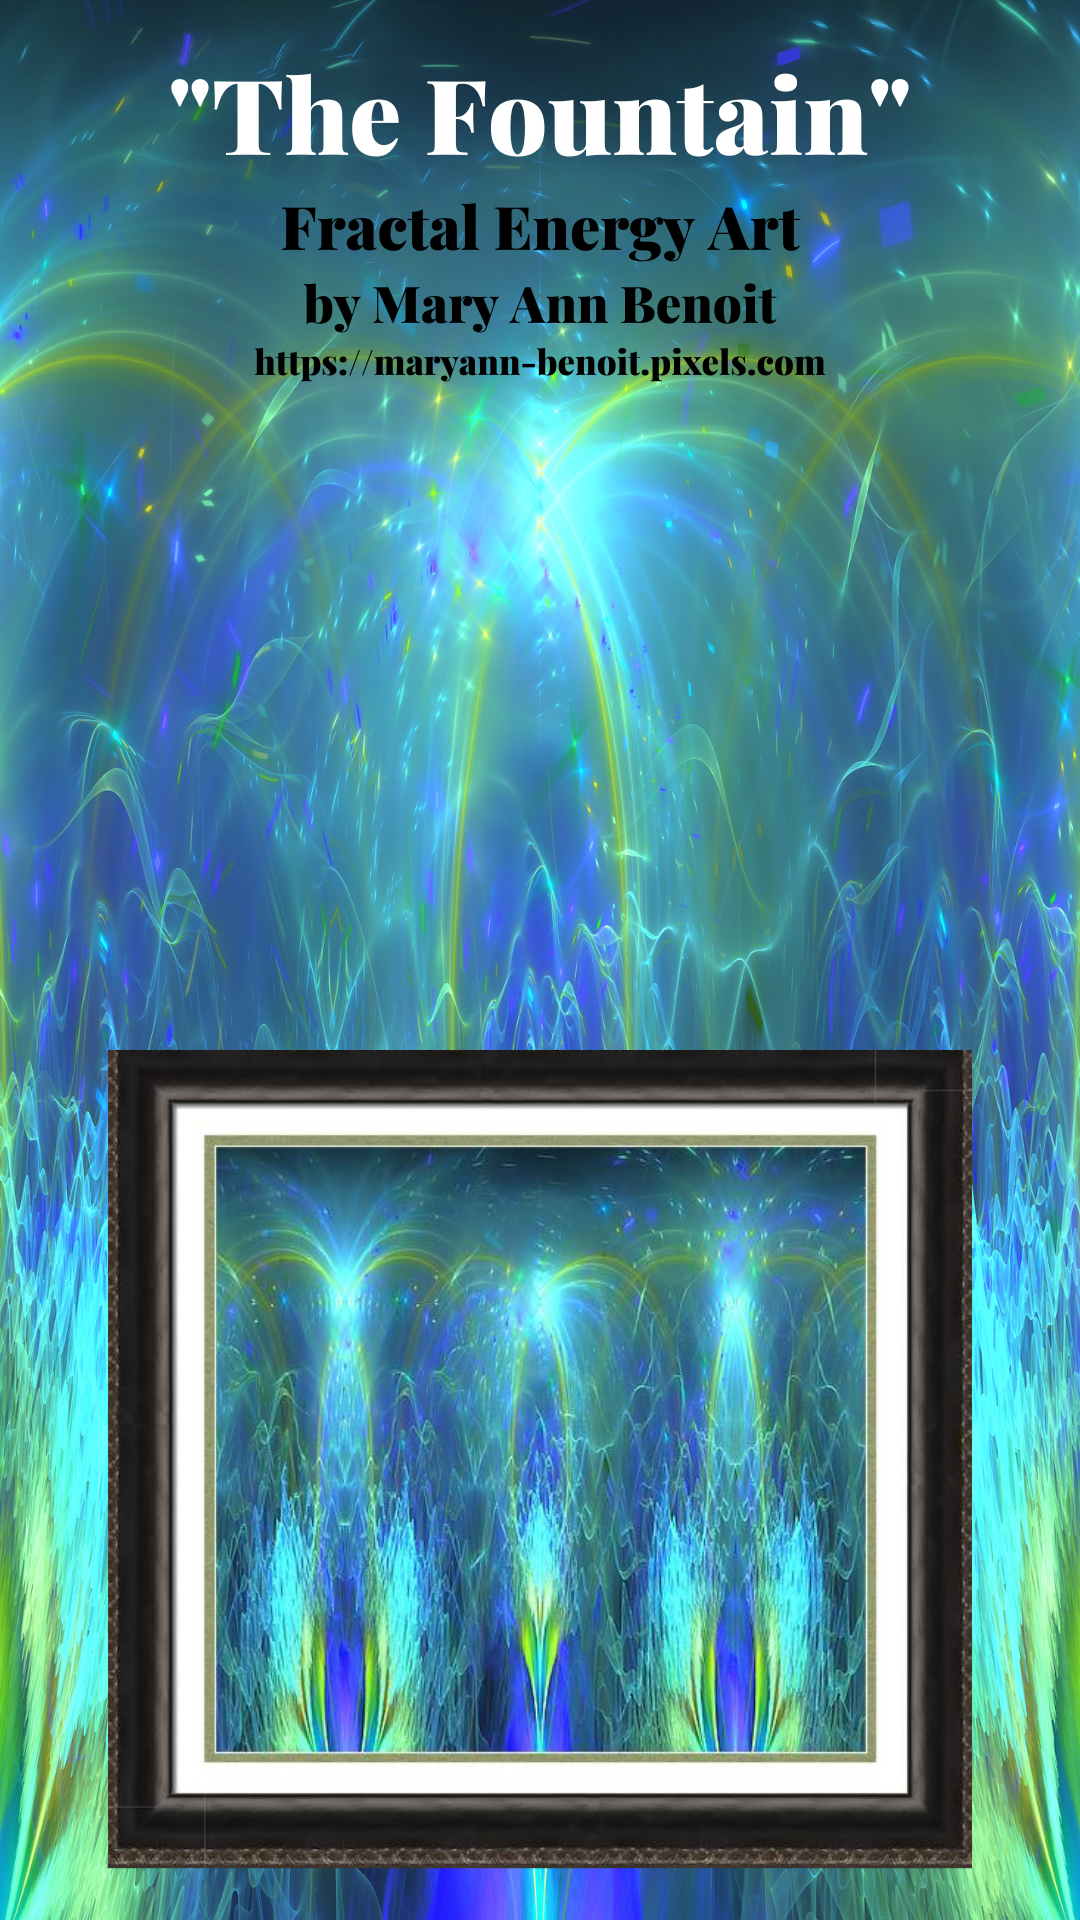 "The Fountain" fractal art by Mary Ann Benoit on Pixels.com